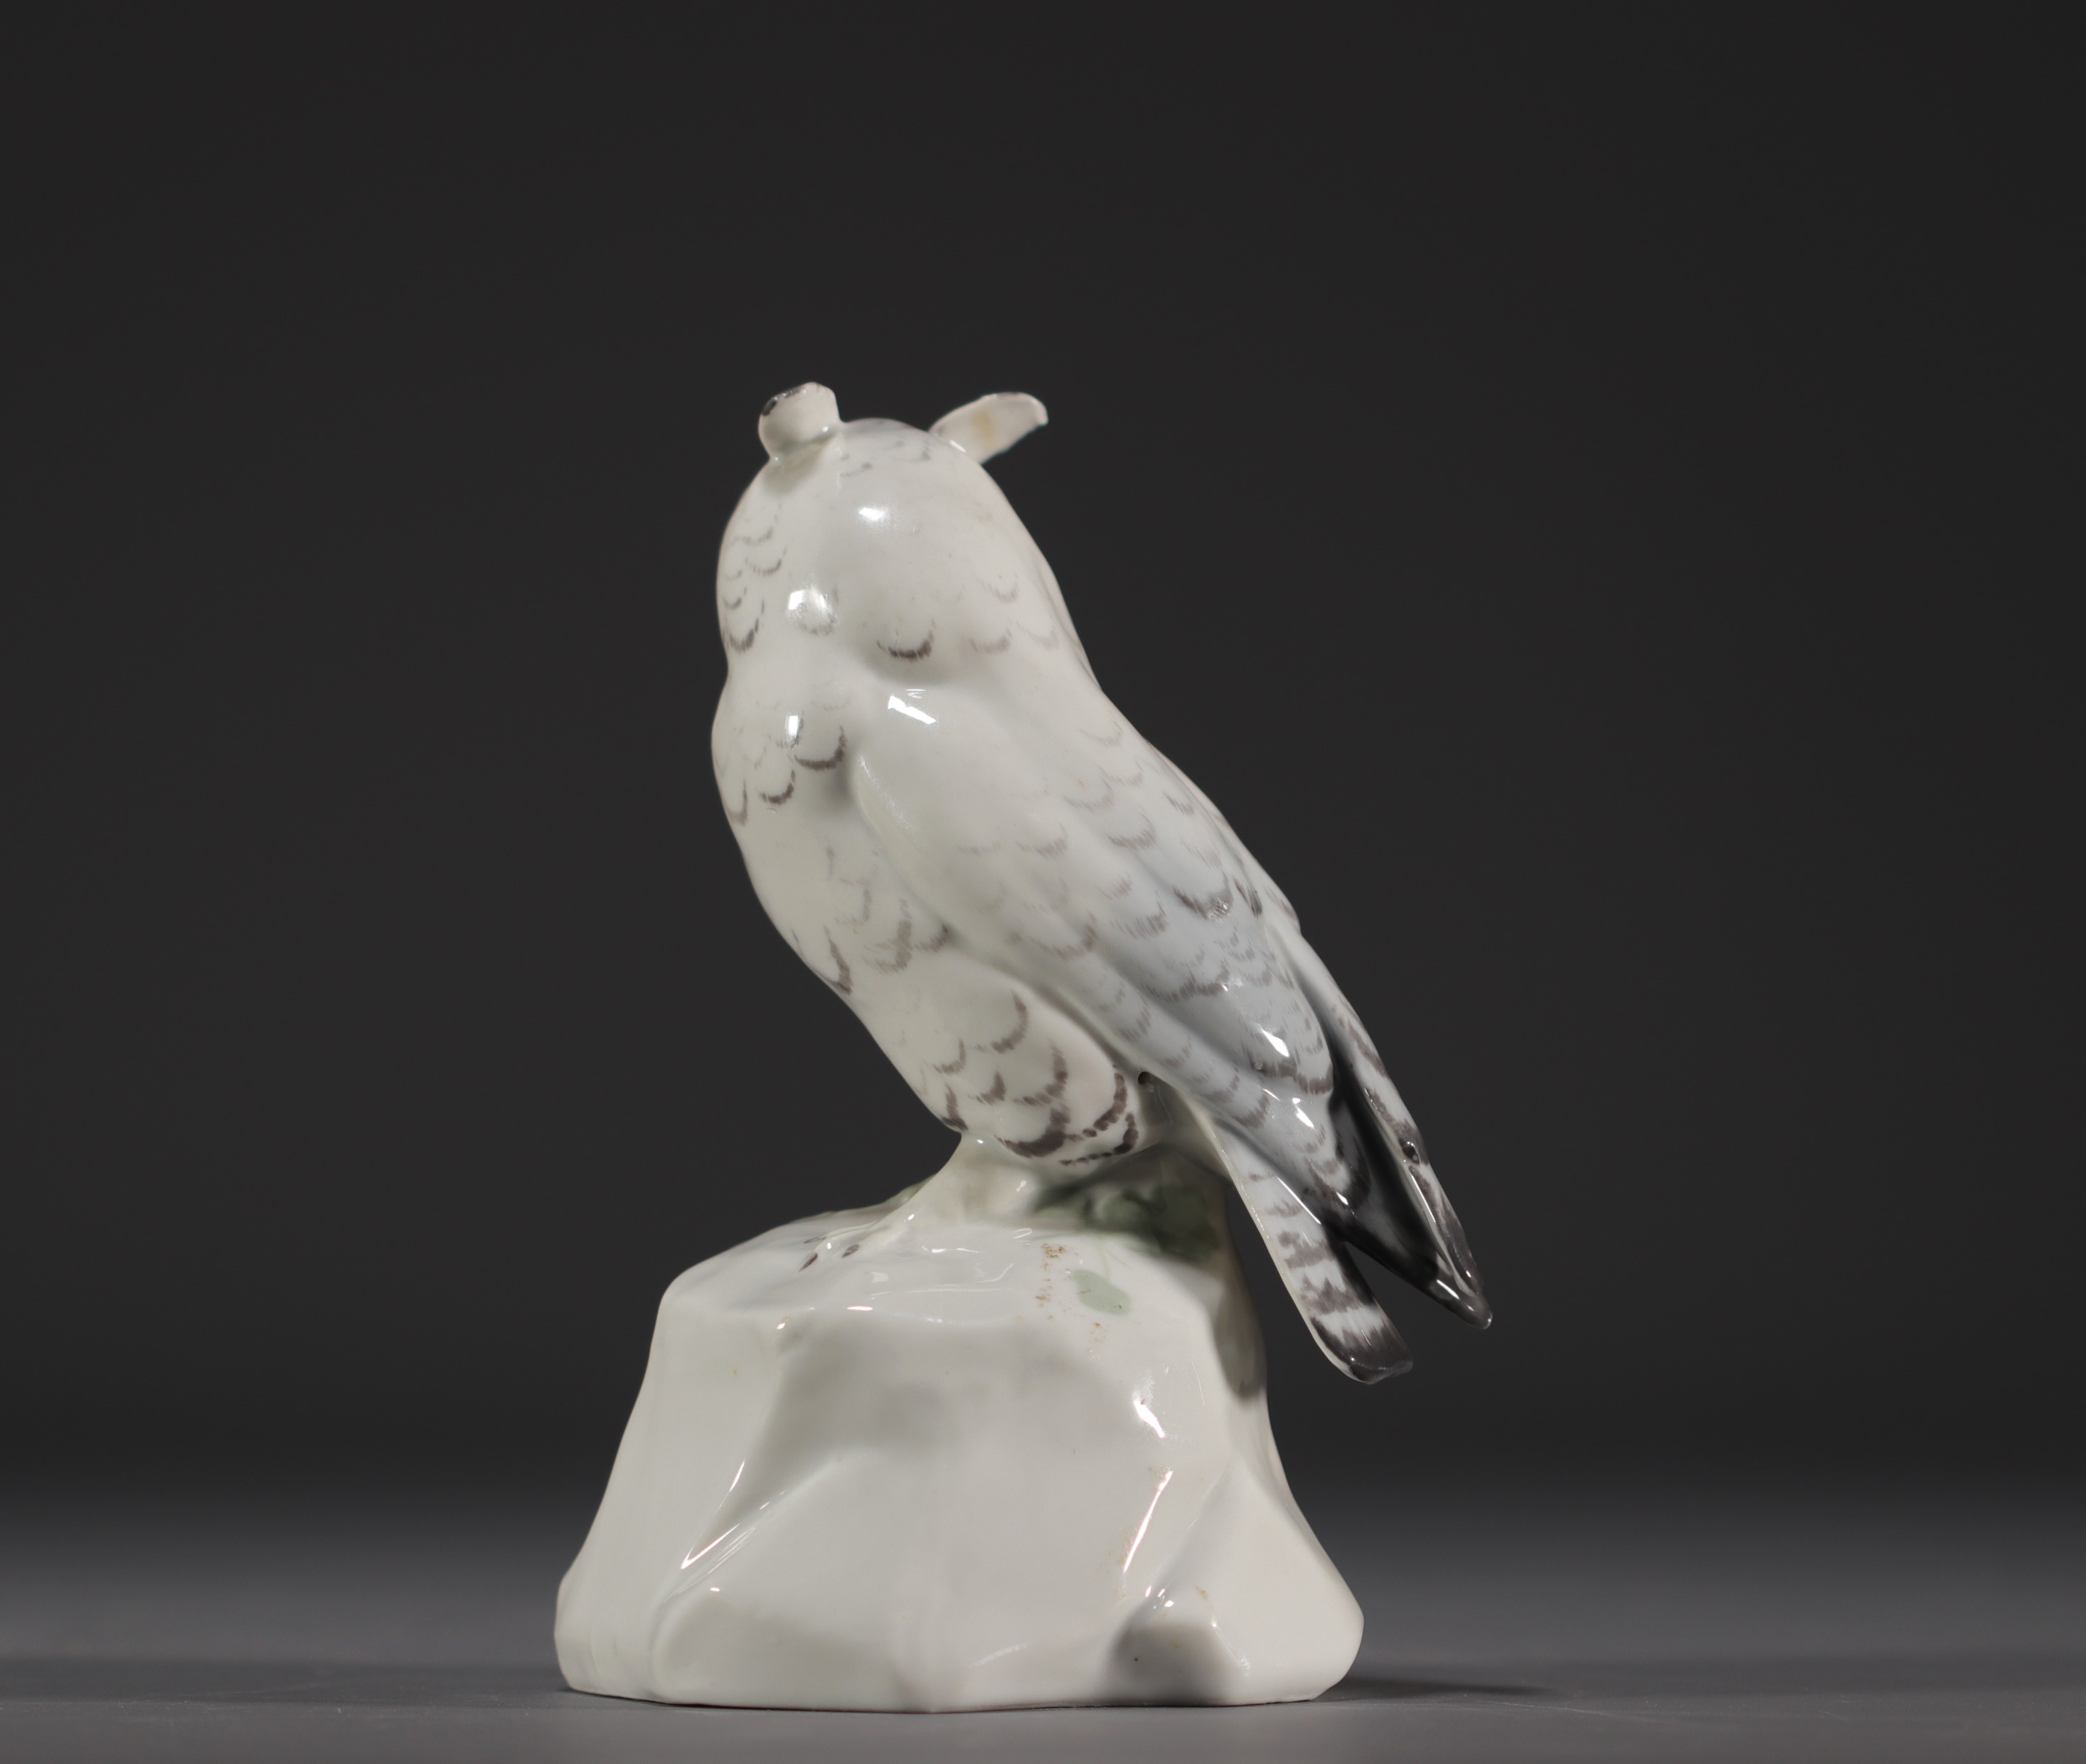 "Grand-duc a l'affut" (Great horned owl on the prowl) Porcelain statuette, debossed mark under the p - Image 2 of 4